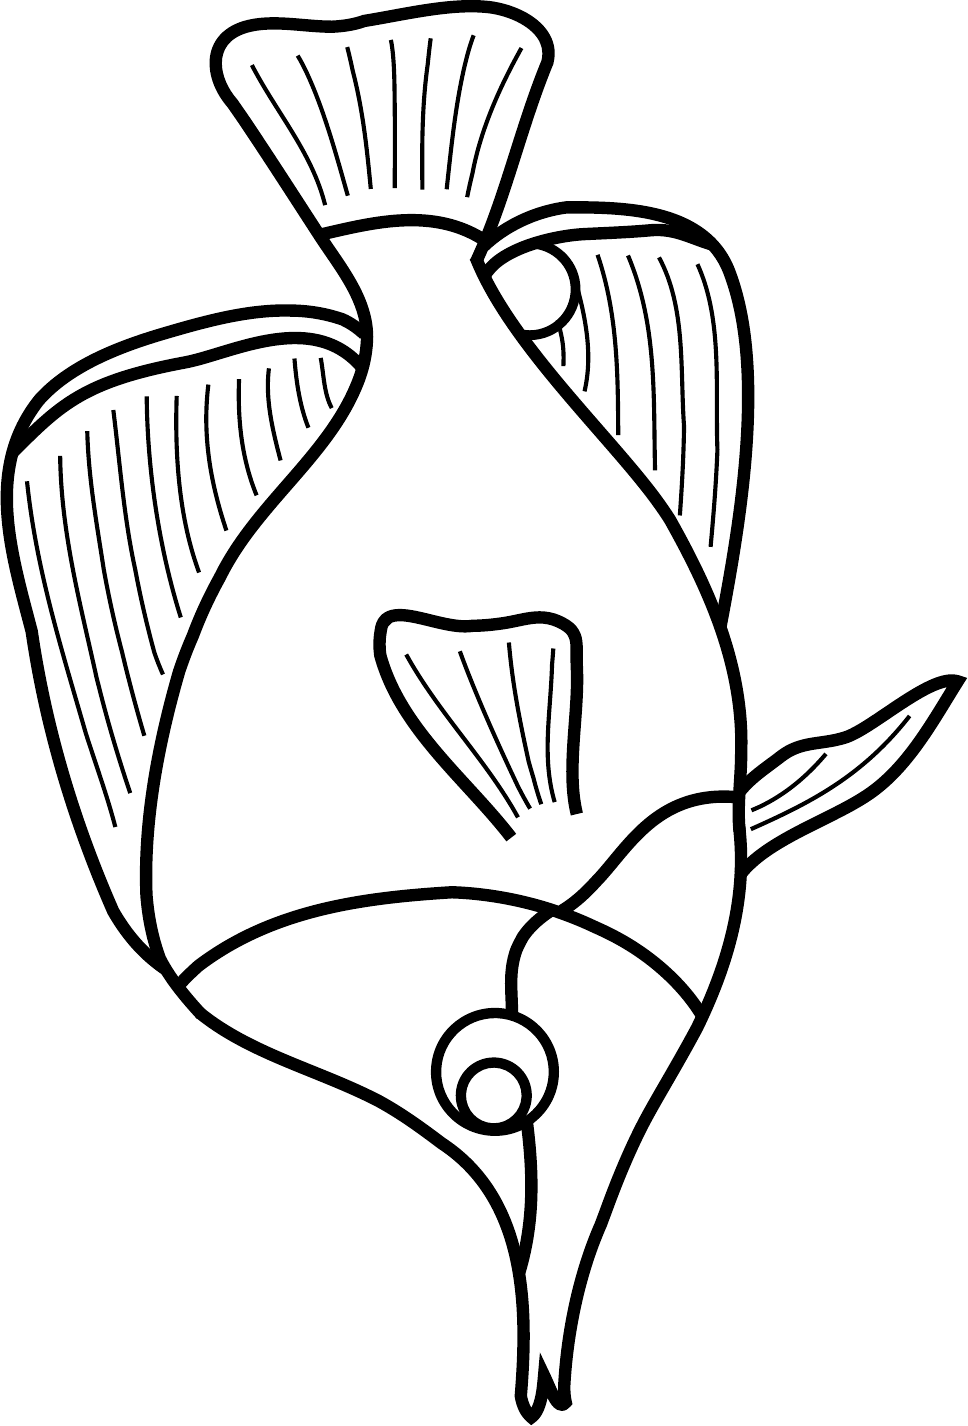 Long-Nosed Butterfly Fish Template